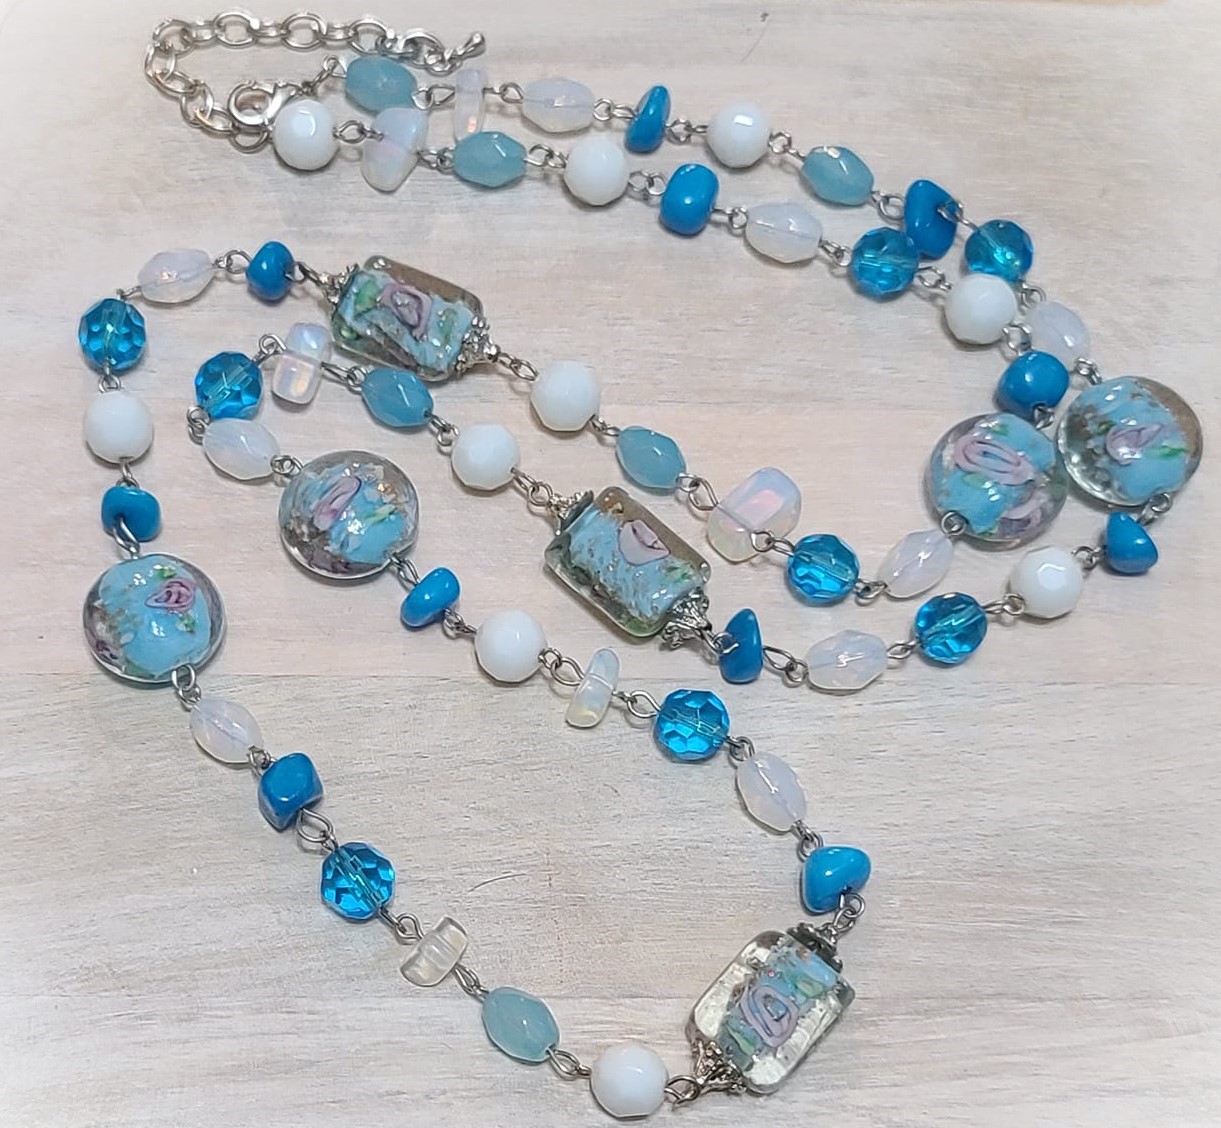 Turquoise and white murano glass bead necklace